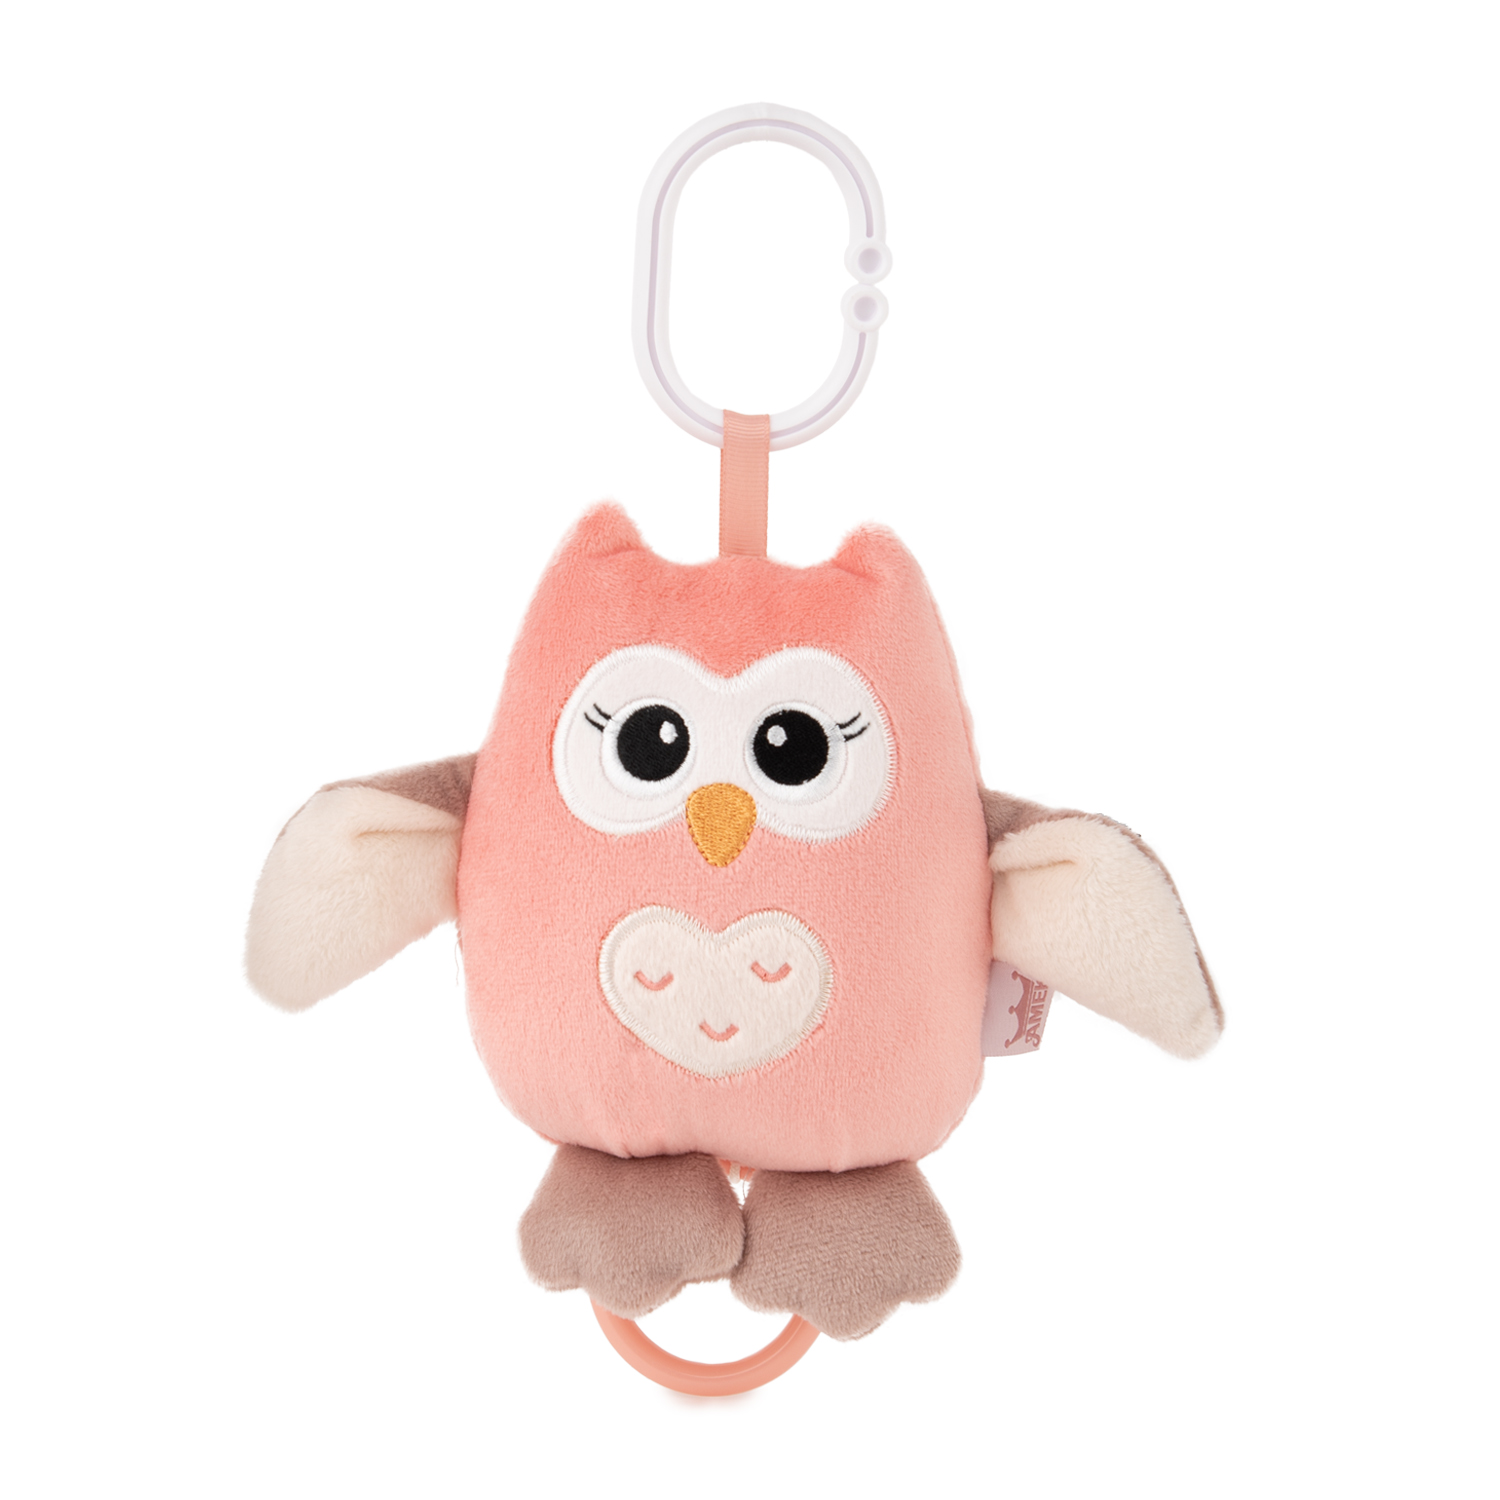 Baby musical owl - Pink